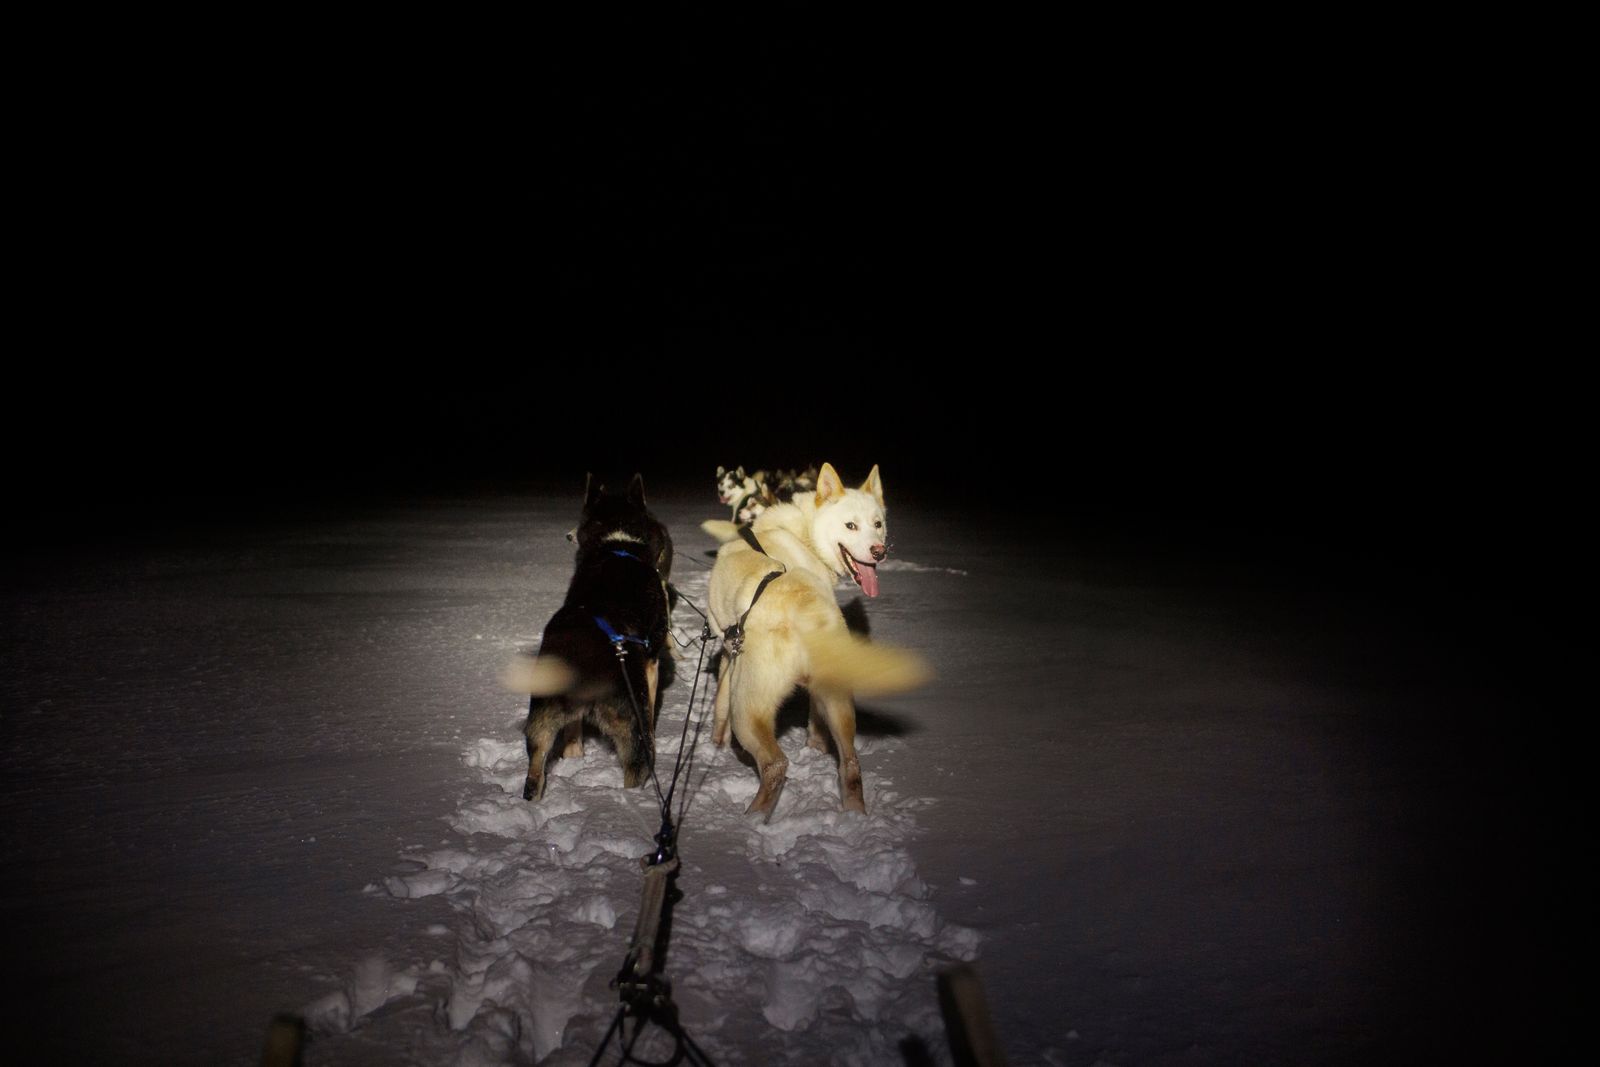 © Axelle de Russé - Tourism activities do not stop during the polar night. Even in the dark, sled dogs know their path. December 2018, 10 am.